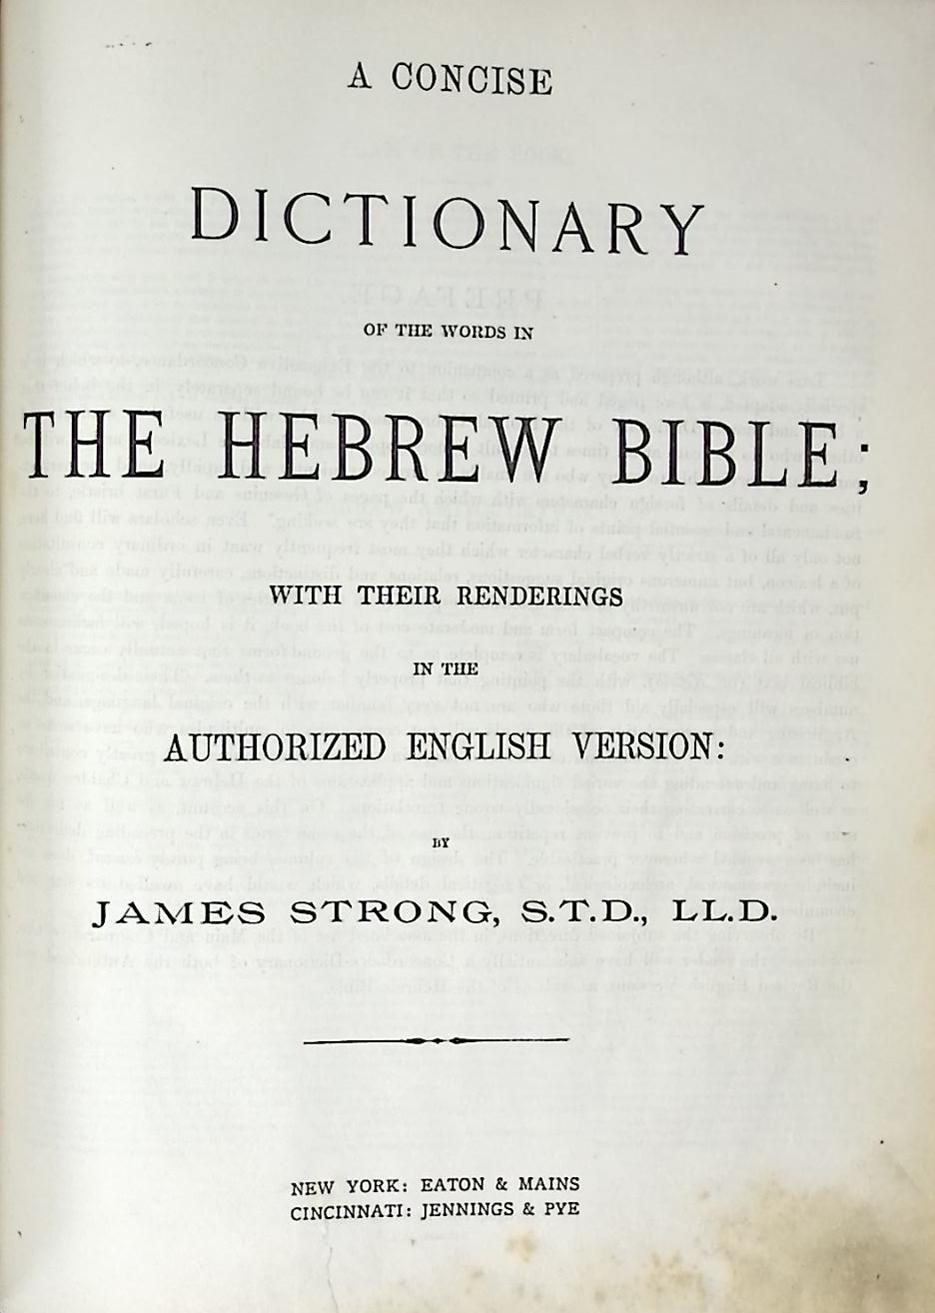 The Exhaustive Concordance of the Bible Showing every Word of the Text of the Common English Version ...